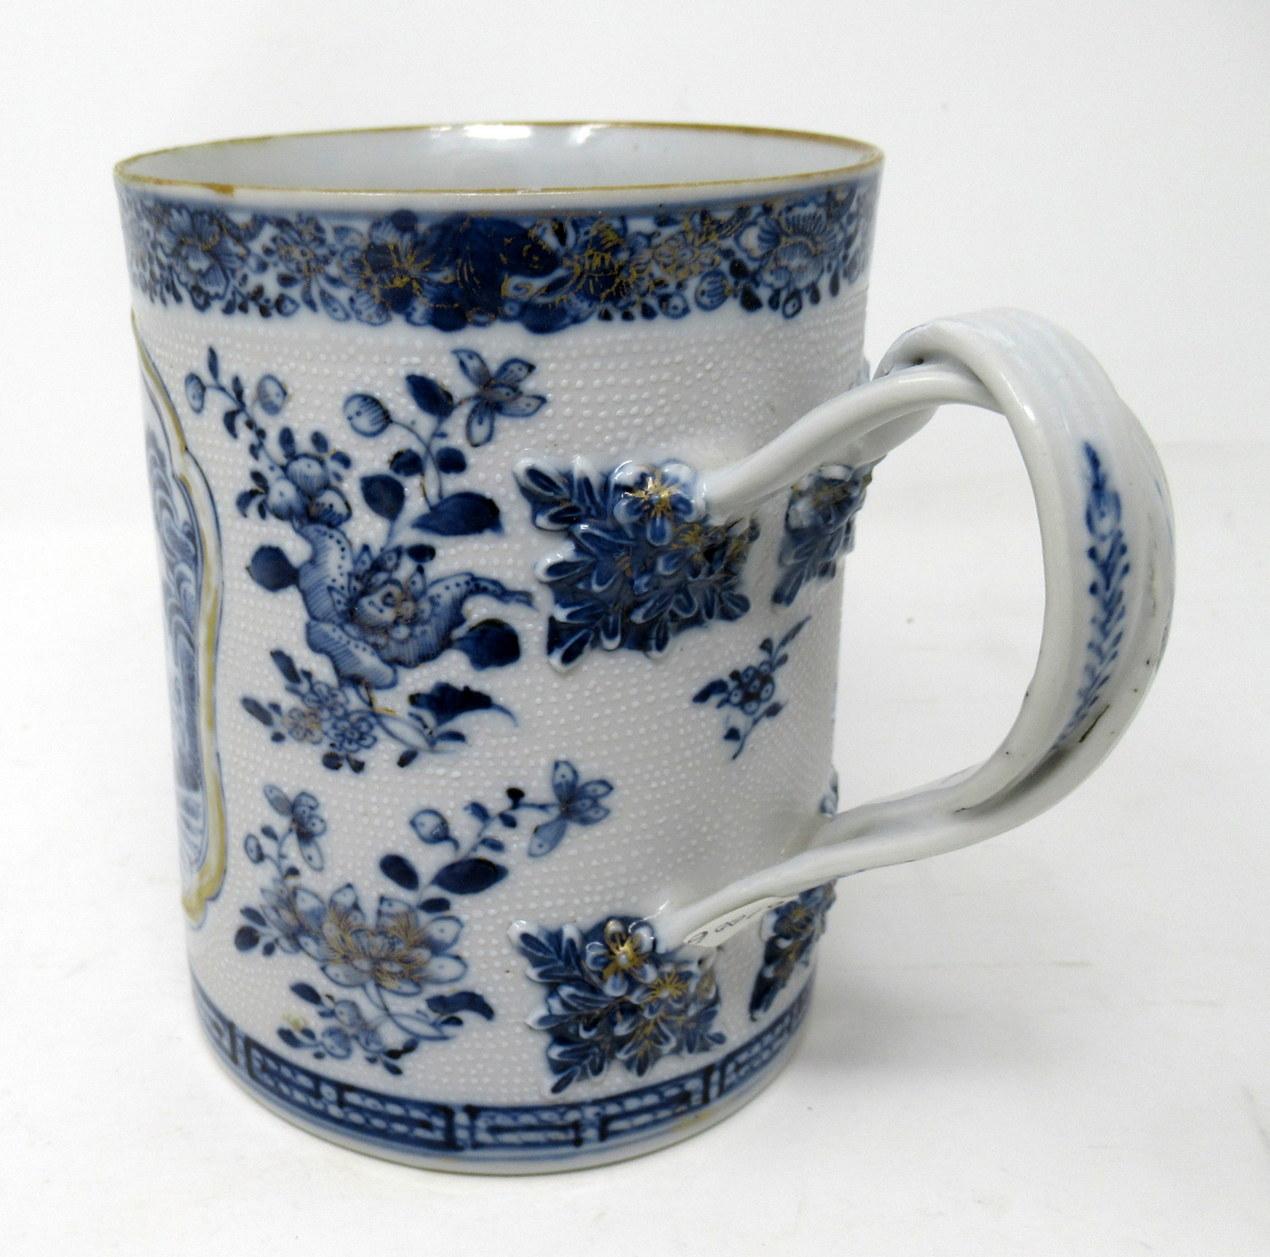 A very fine Chinese export hand decorated blue and white porcelain tankard of unusually large proportions and exceptional quality, superbly decorated depicting a central framed reserve of a view of a Chinese Village with a river and landscape scene,